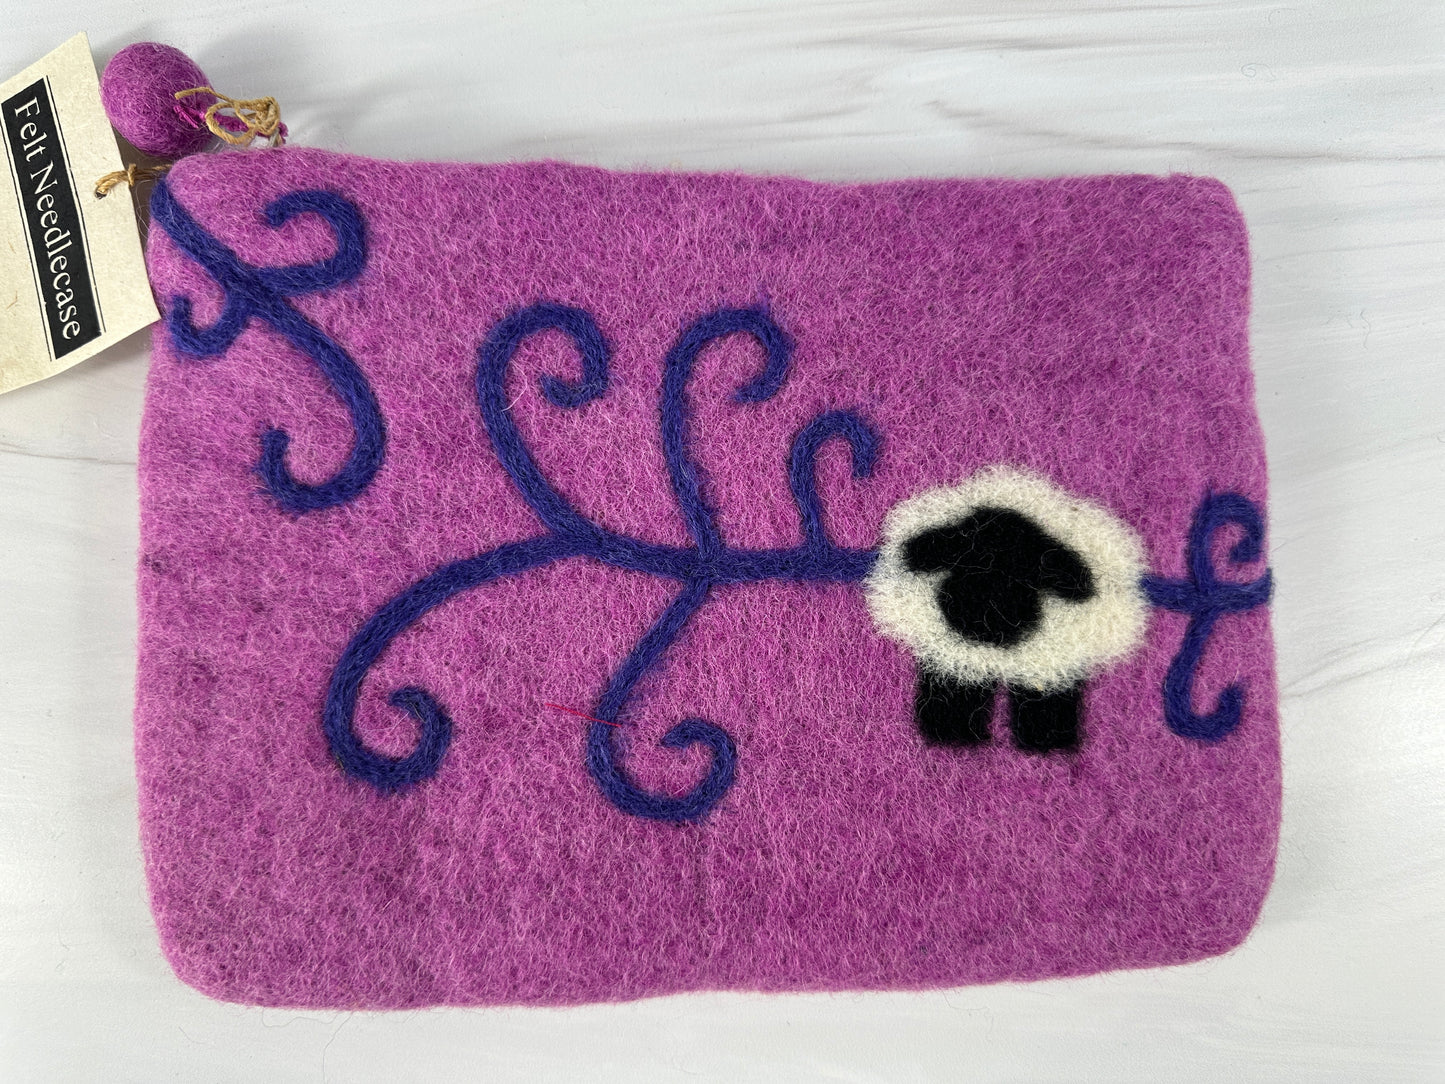 Sheep with Swirls Notions Pouch